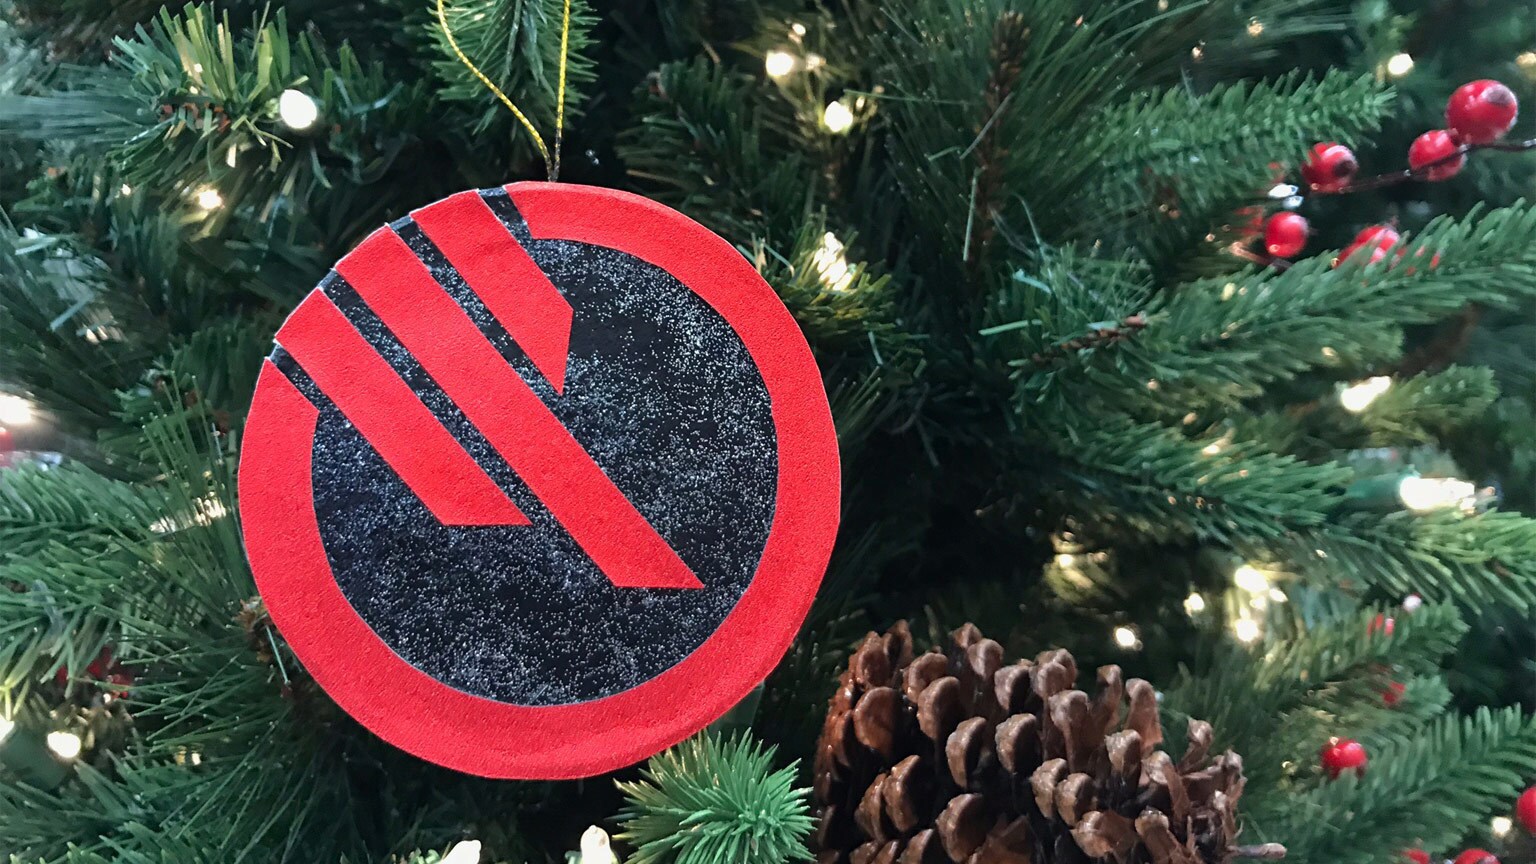 The Empire’s Holiday Spirit Has Come With This DIY Inferno Squad Ornament